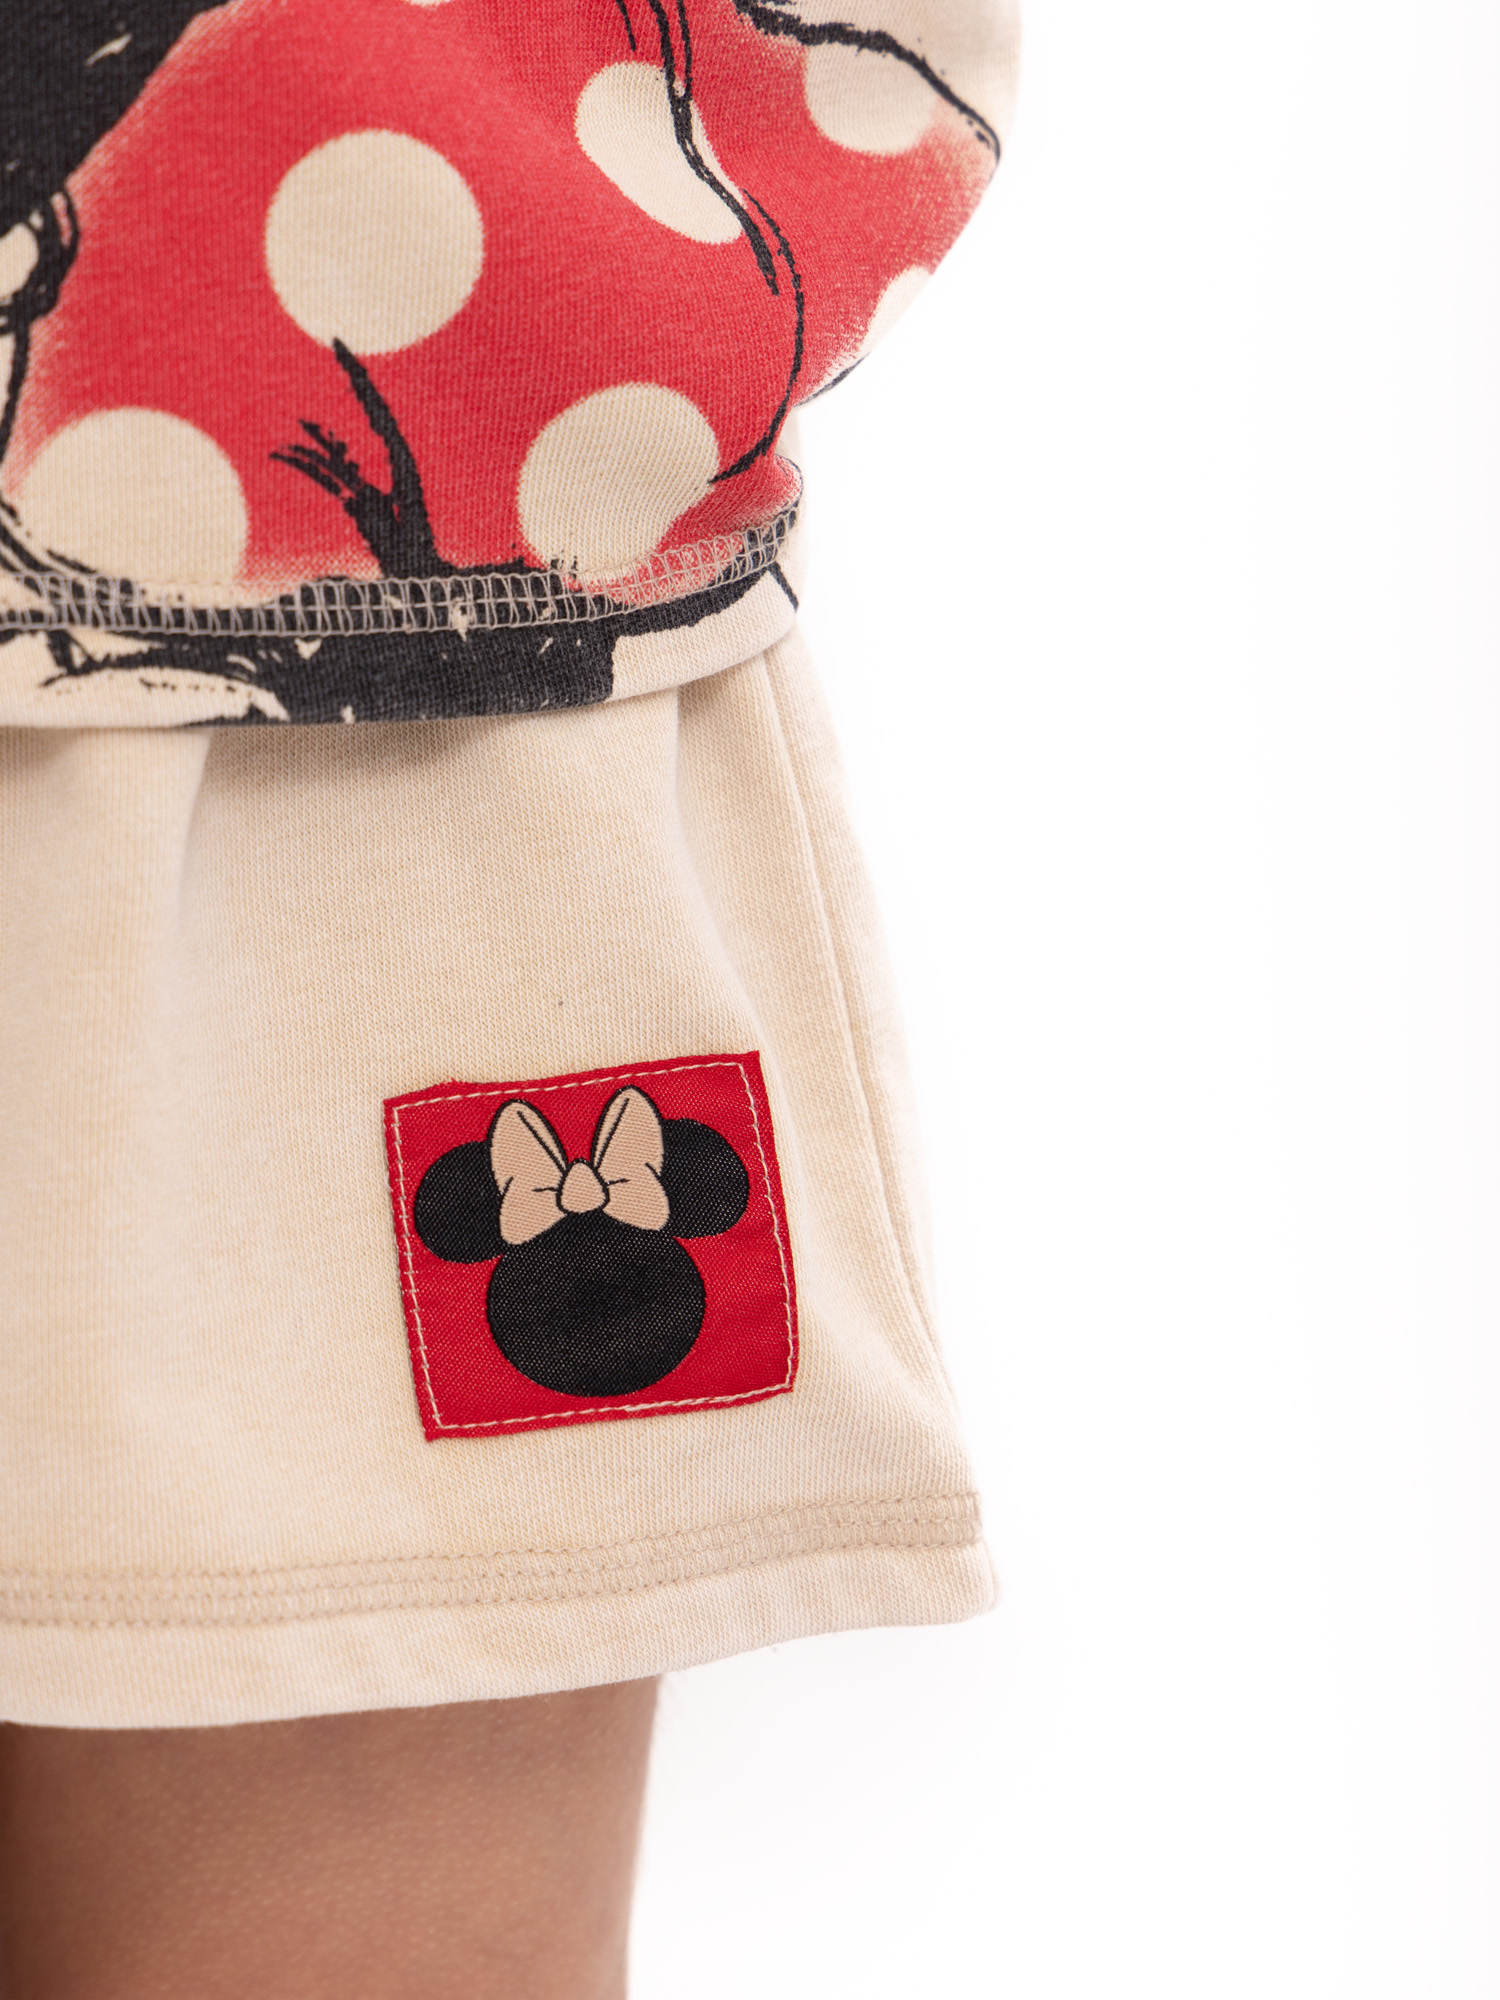 Minnie Mouse Toddler Girls Tee and Shorts Set, 2-Piece, Sizes 12M-5T - image 5 of 11